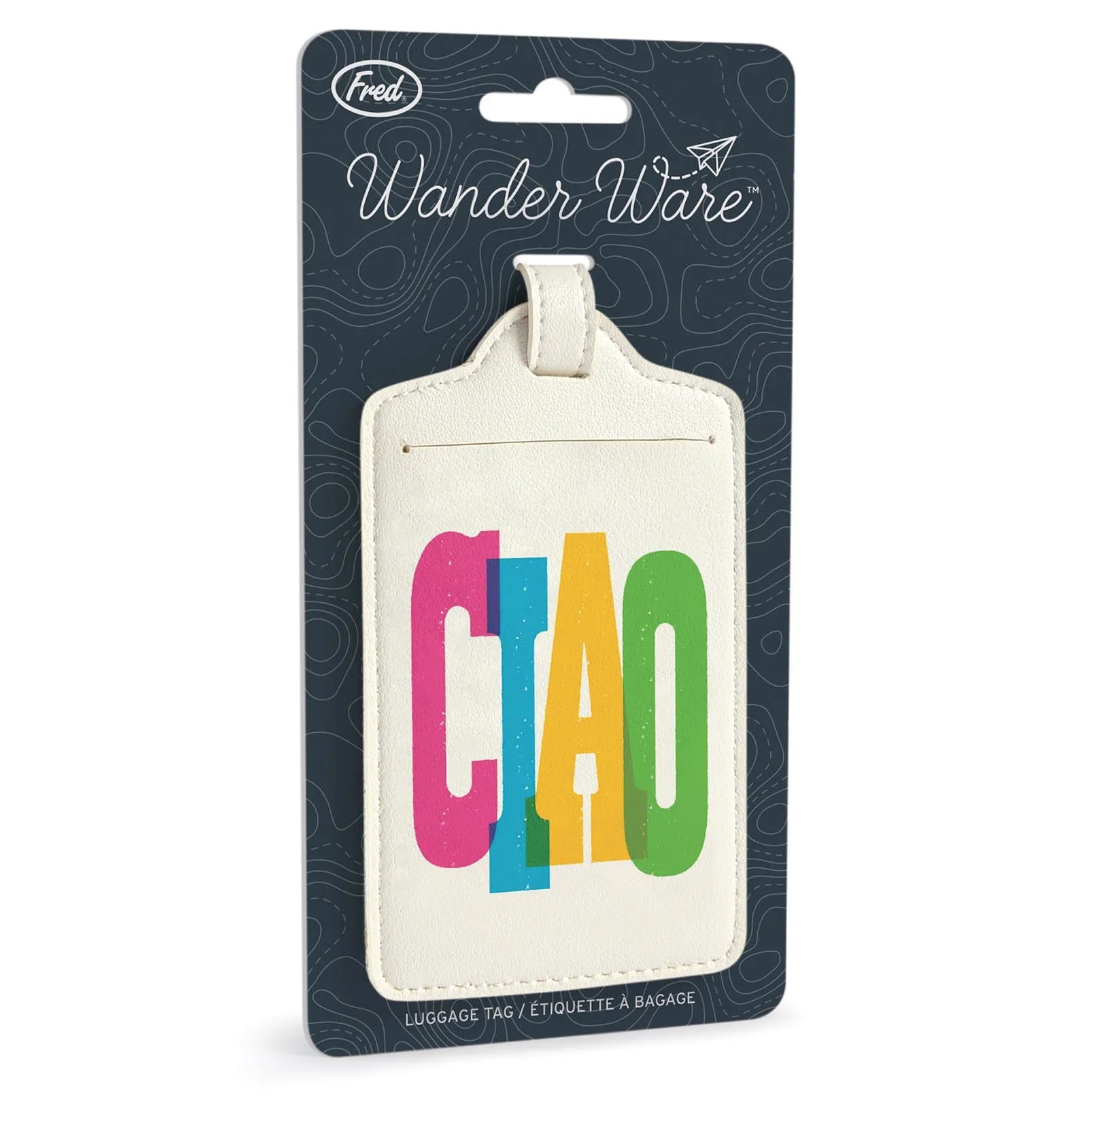 Fred & Friends Luggage Tag in 5 Choices